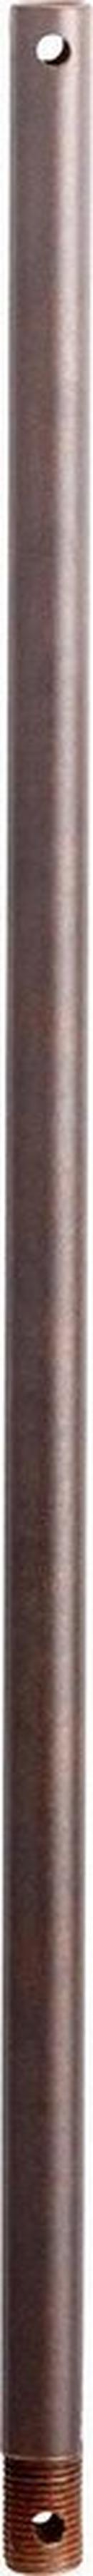 24 in. Universal Thermostat Downrod in Toasted Sienna